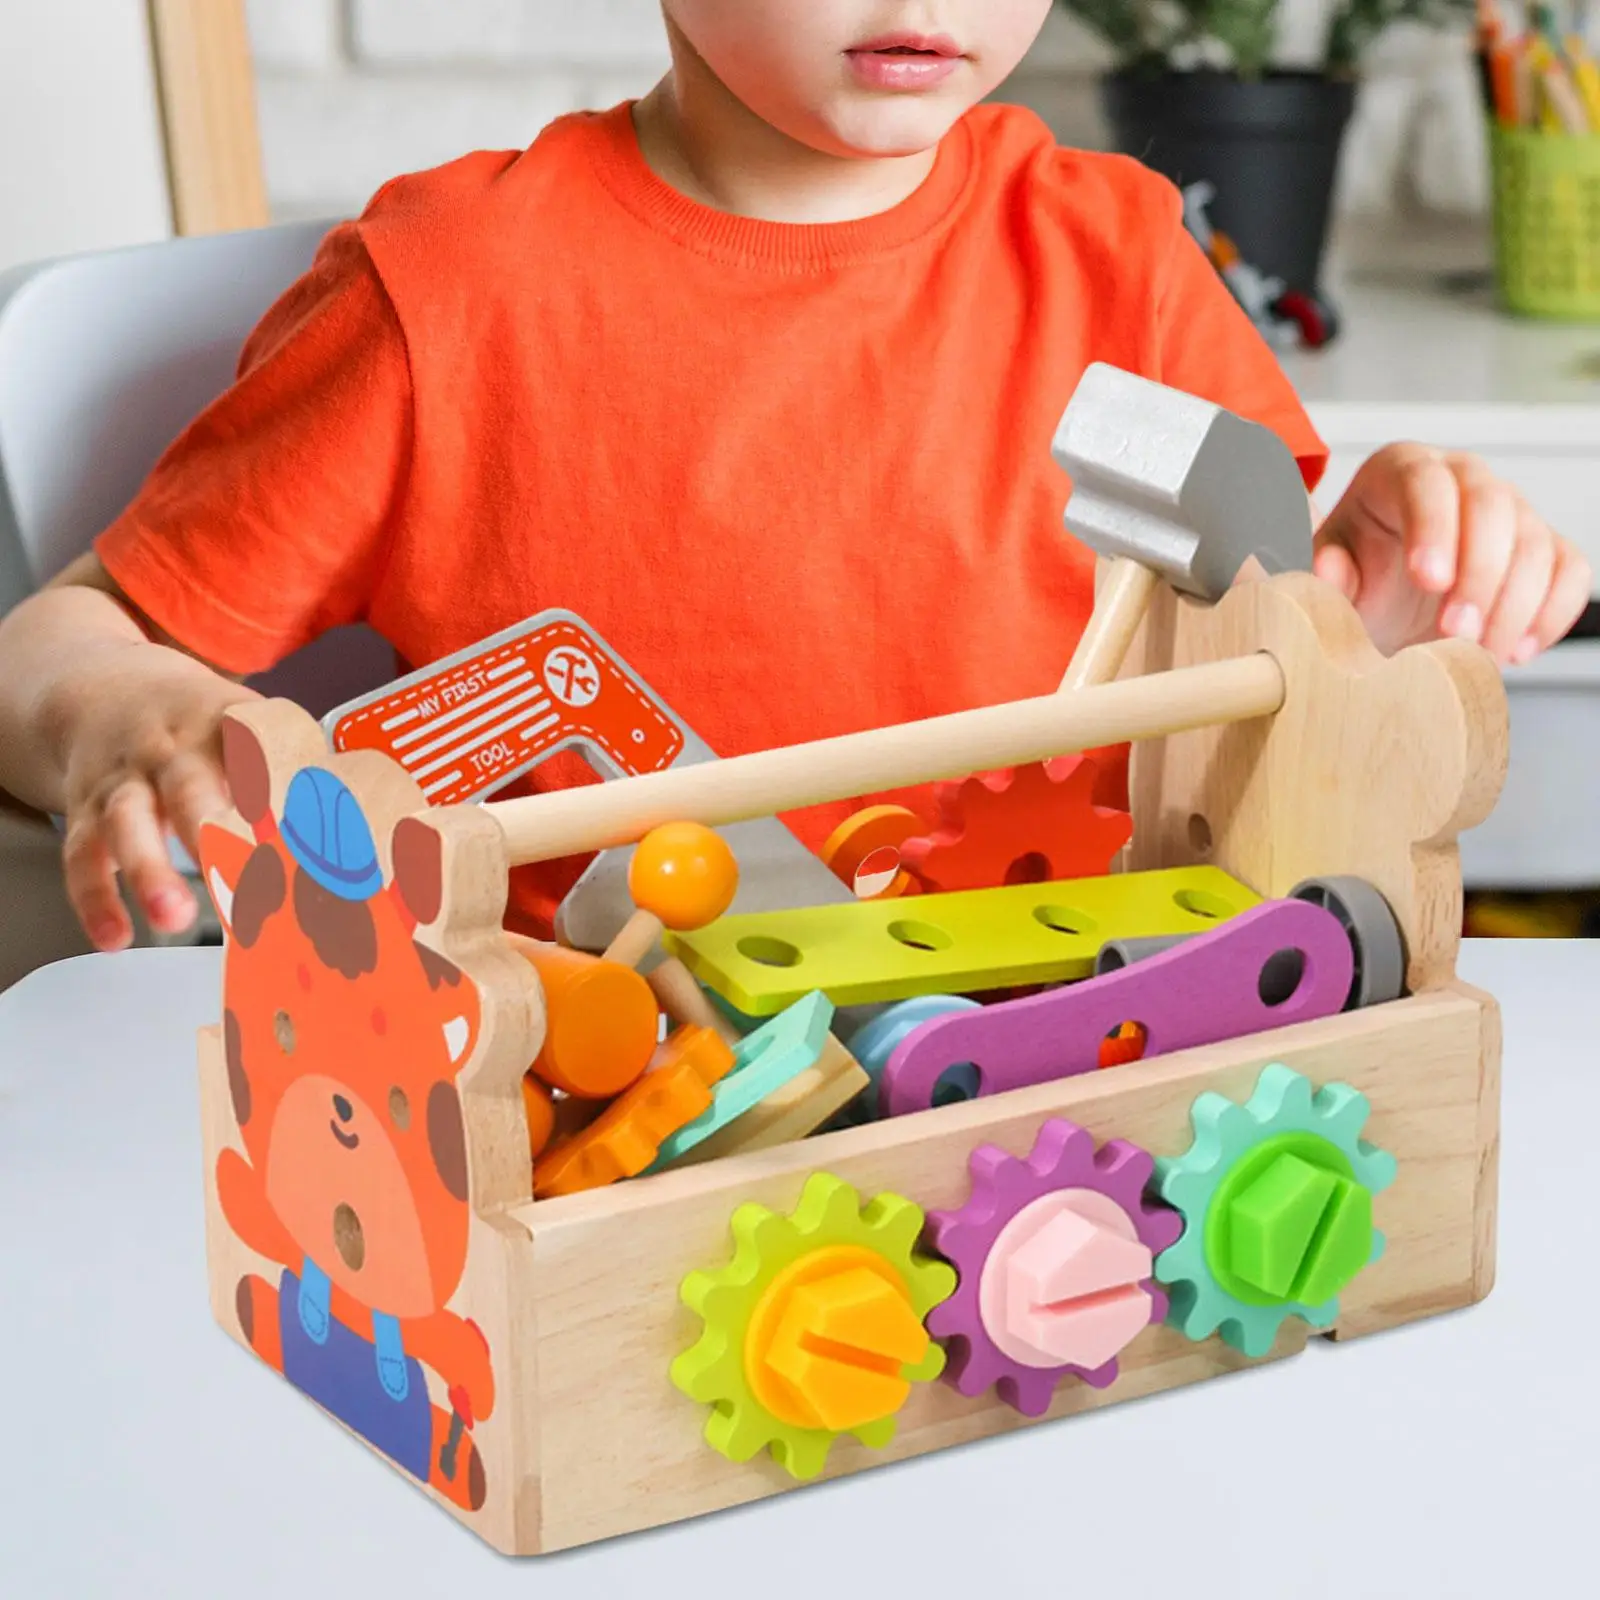 

Wooden Kids Tool Set Early Educational Wooden Pretend Play Tool Box for Kids 3 Year Olds and up Preschool Toddlers Holiday Gifts